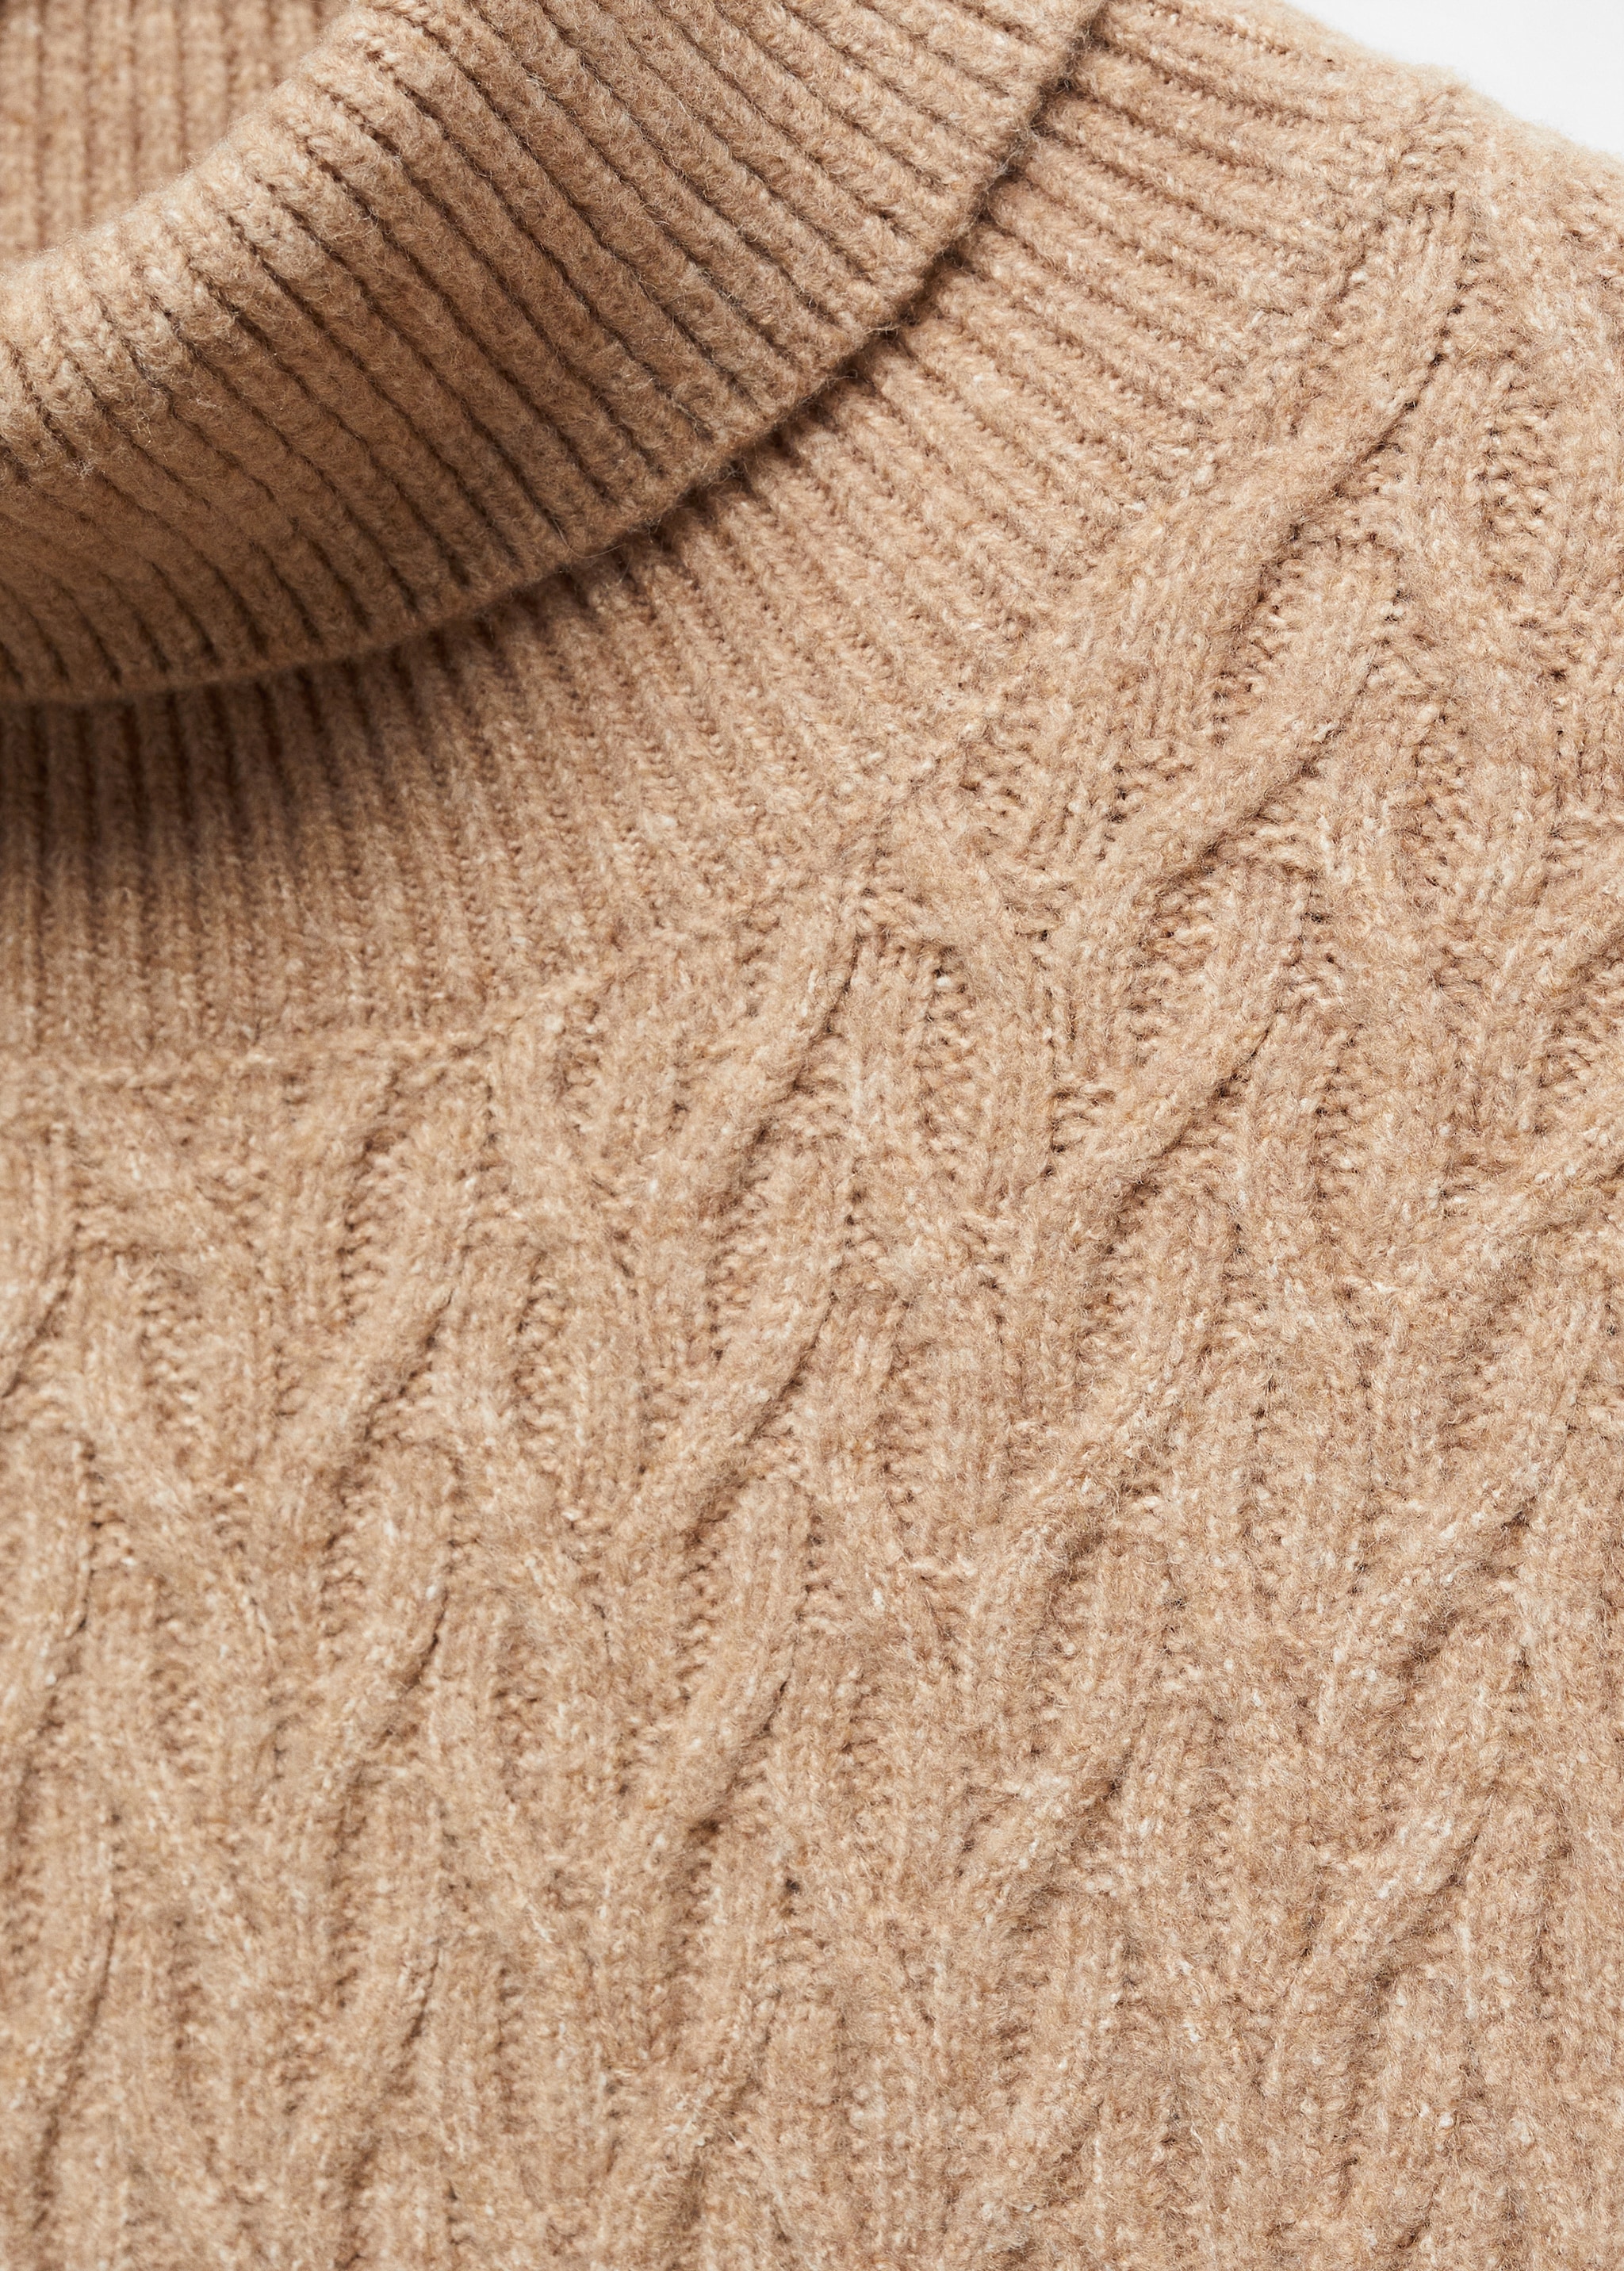 Braided turtleneck sweater - Details of the article 8